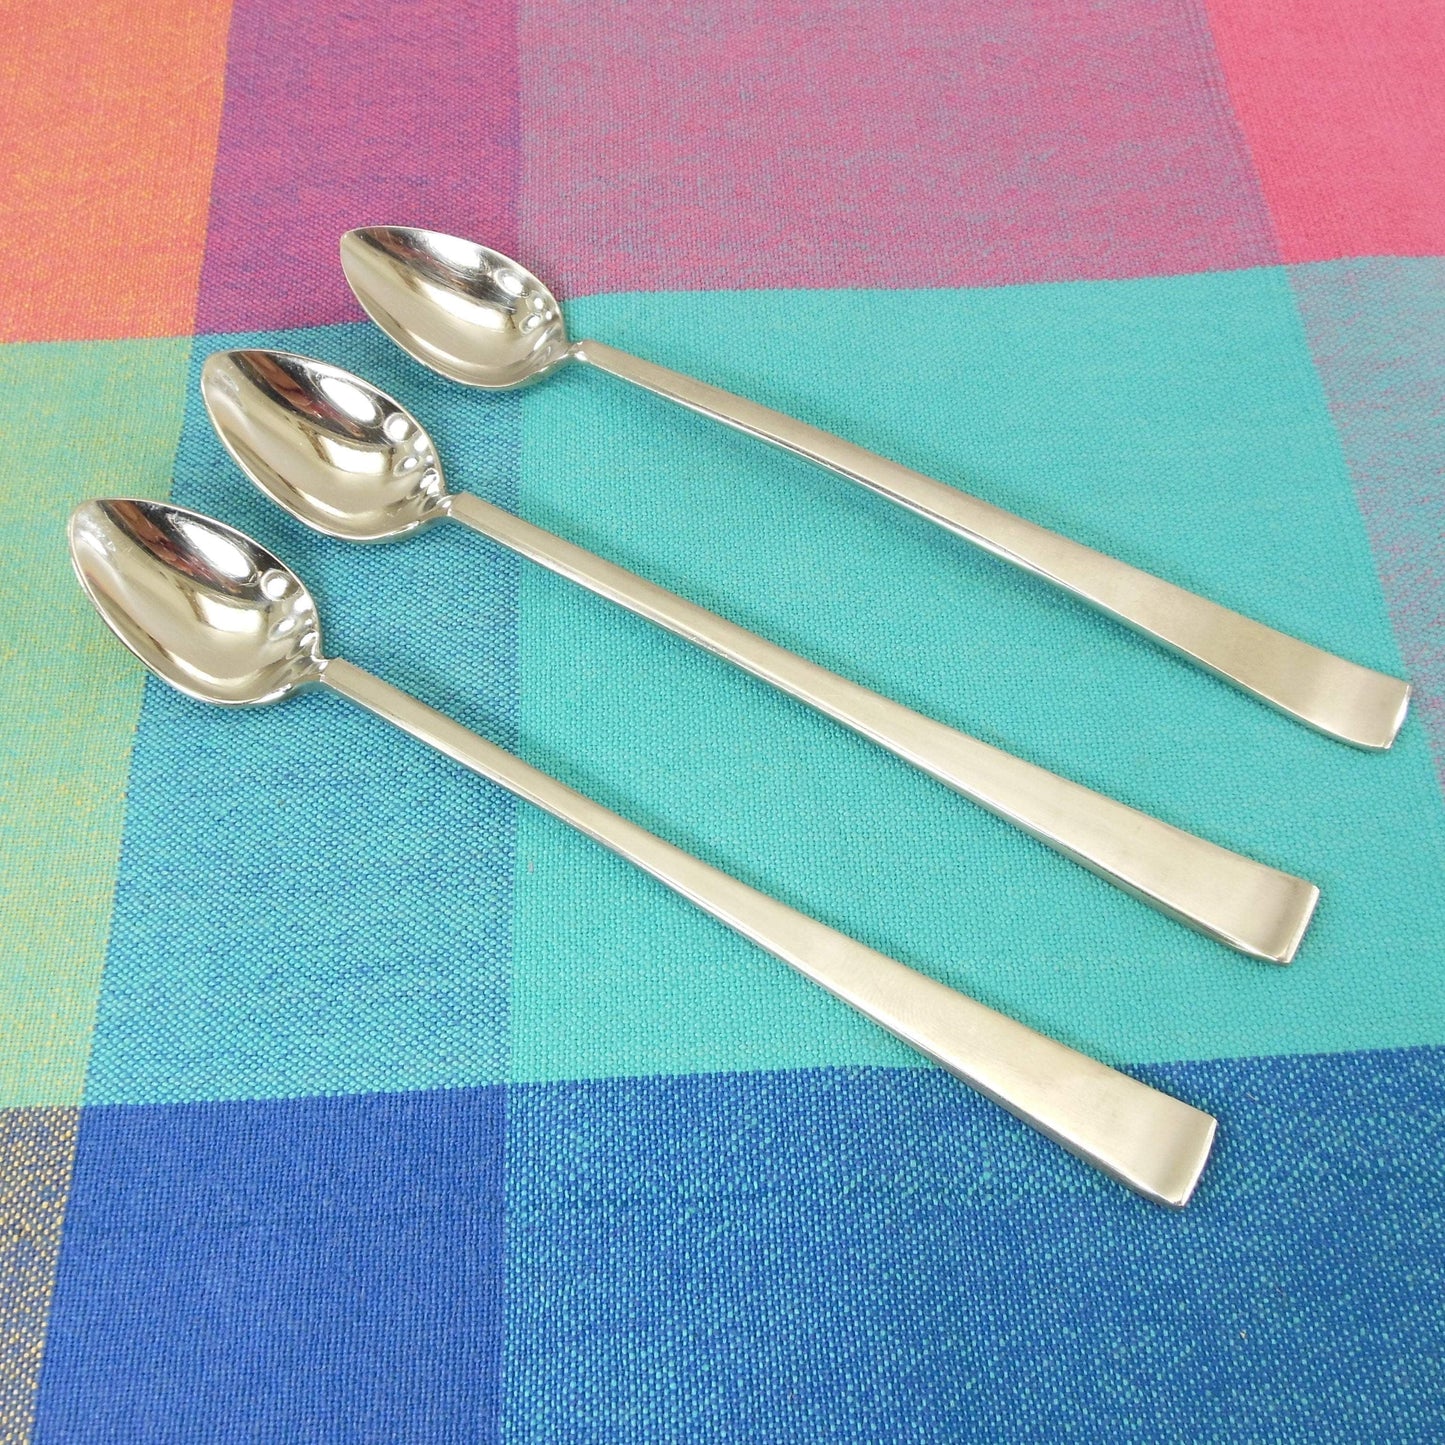 Lauffer Holland Cora 3 Stainless Iced Tea Spoons